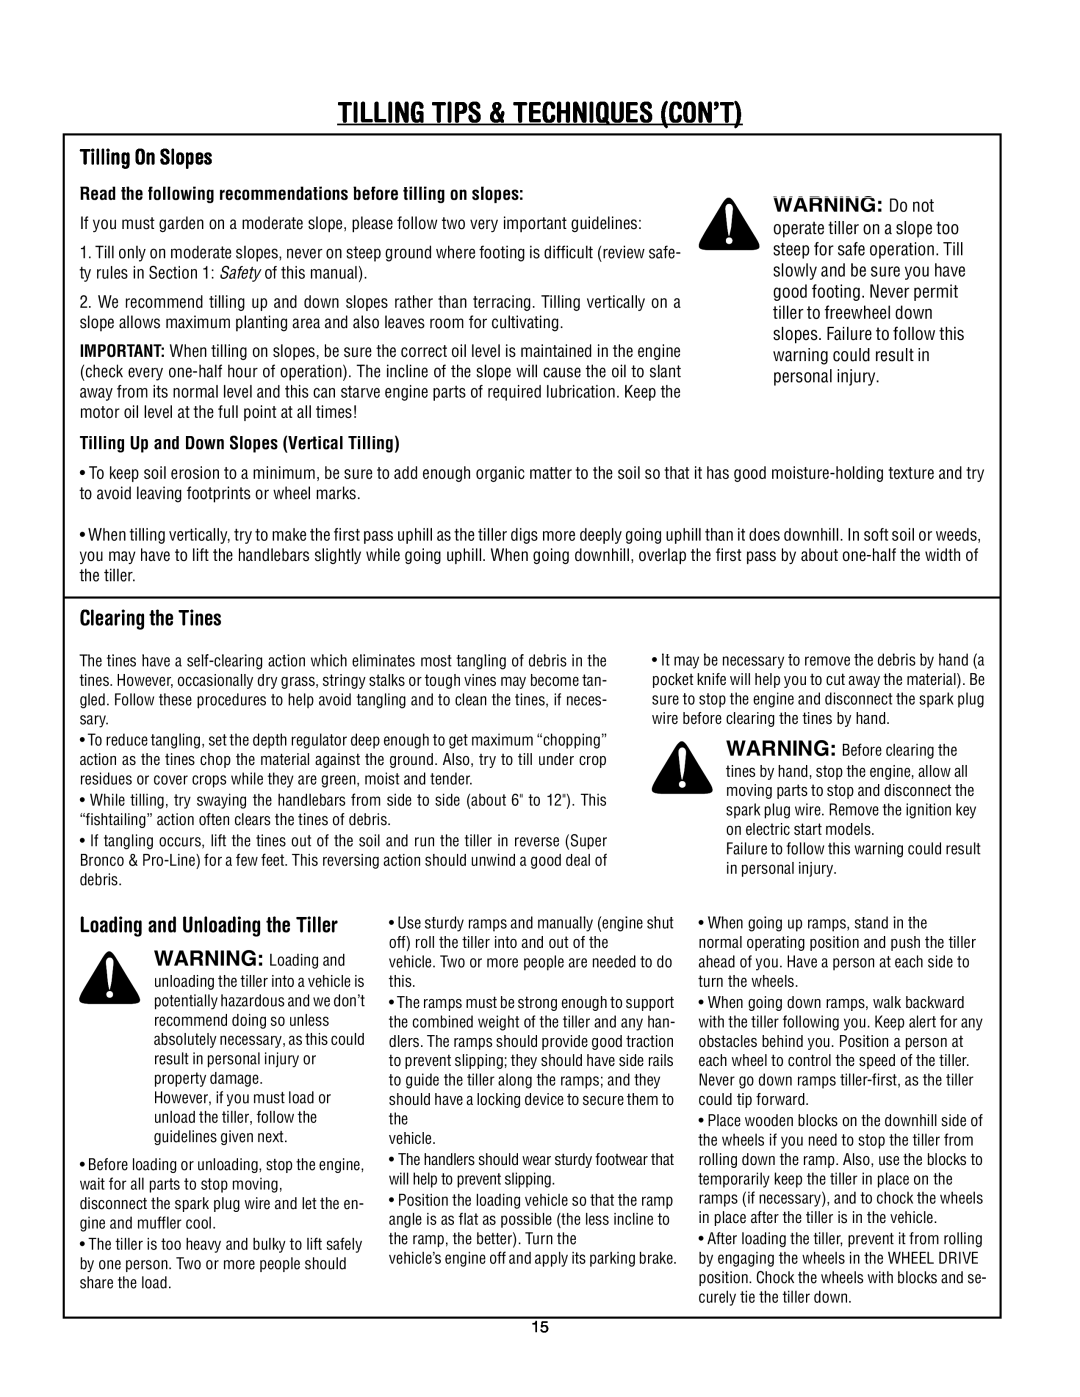 Troy-Bilt Super Bronco manual Tilling Tips & Techniques Con’T, Tilling On Slopes, WARNING Do not, Clearing the Tines 